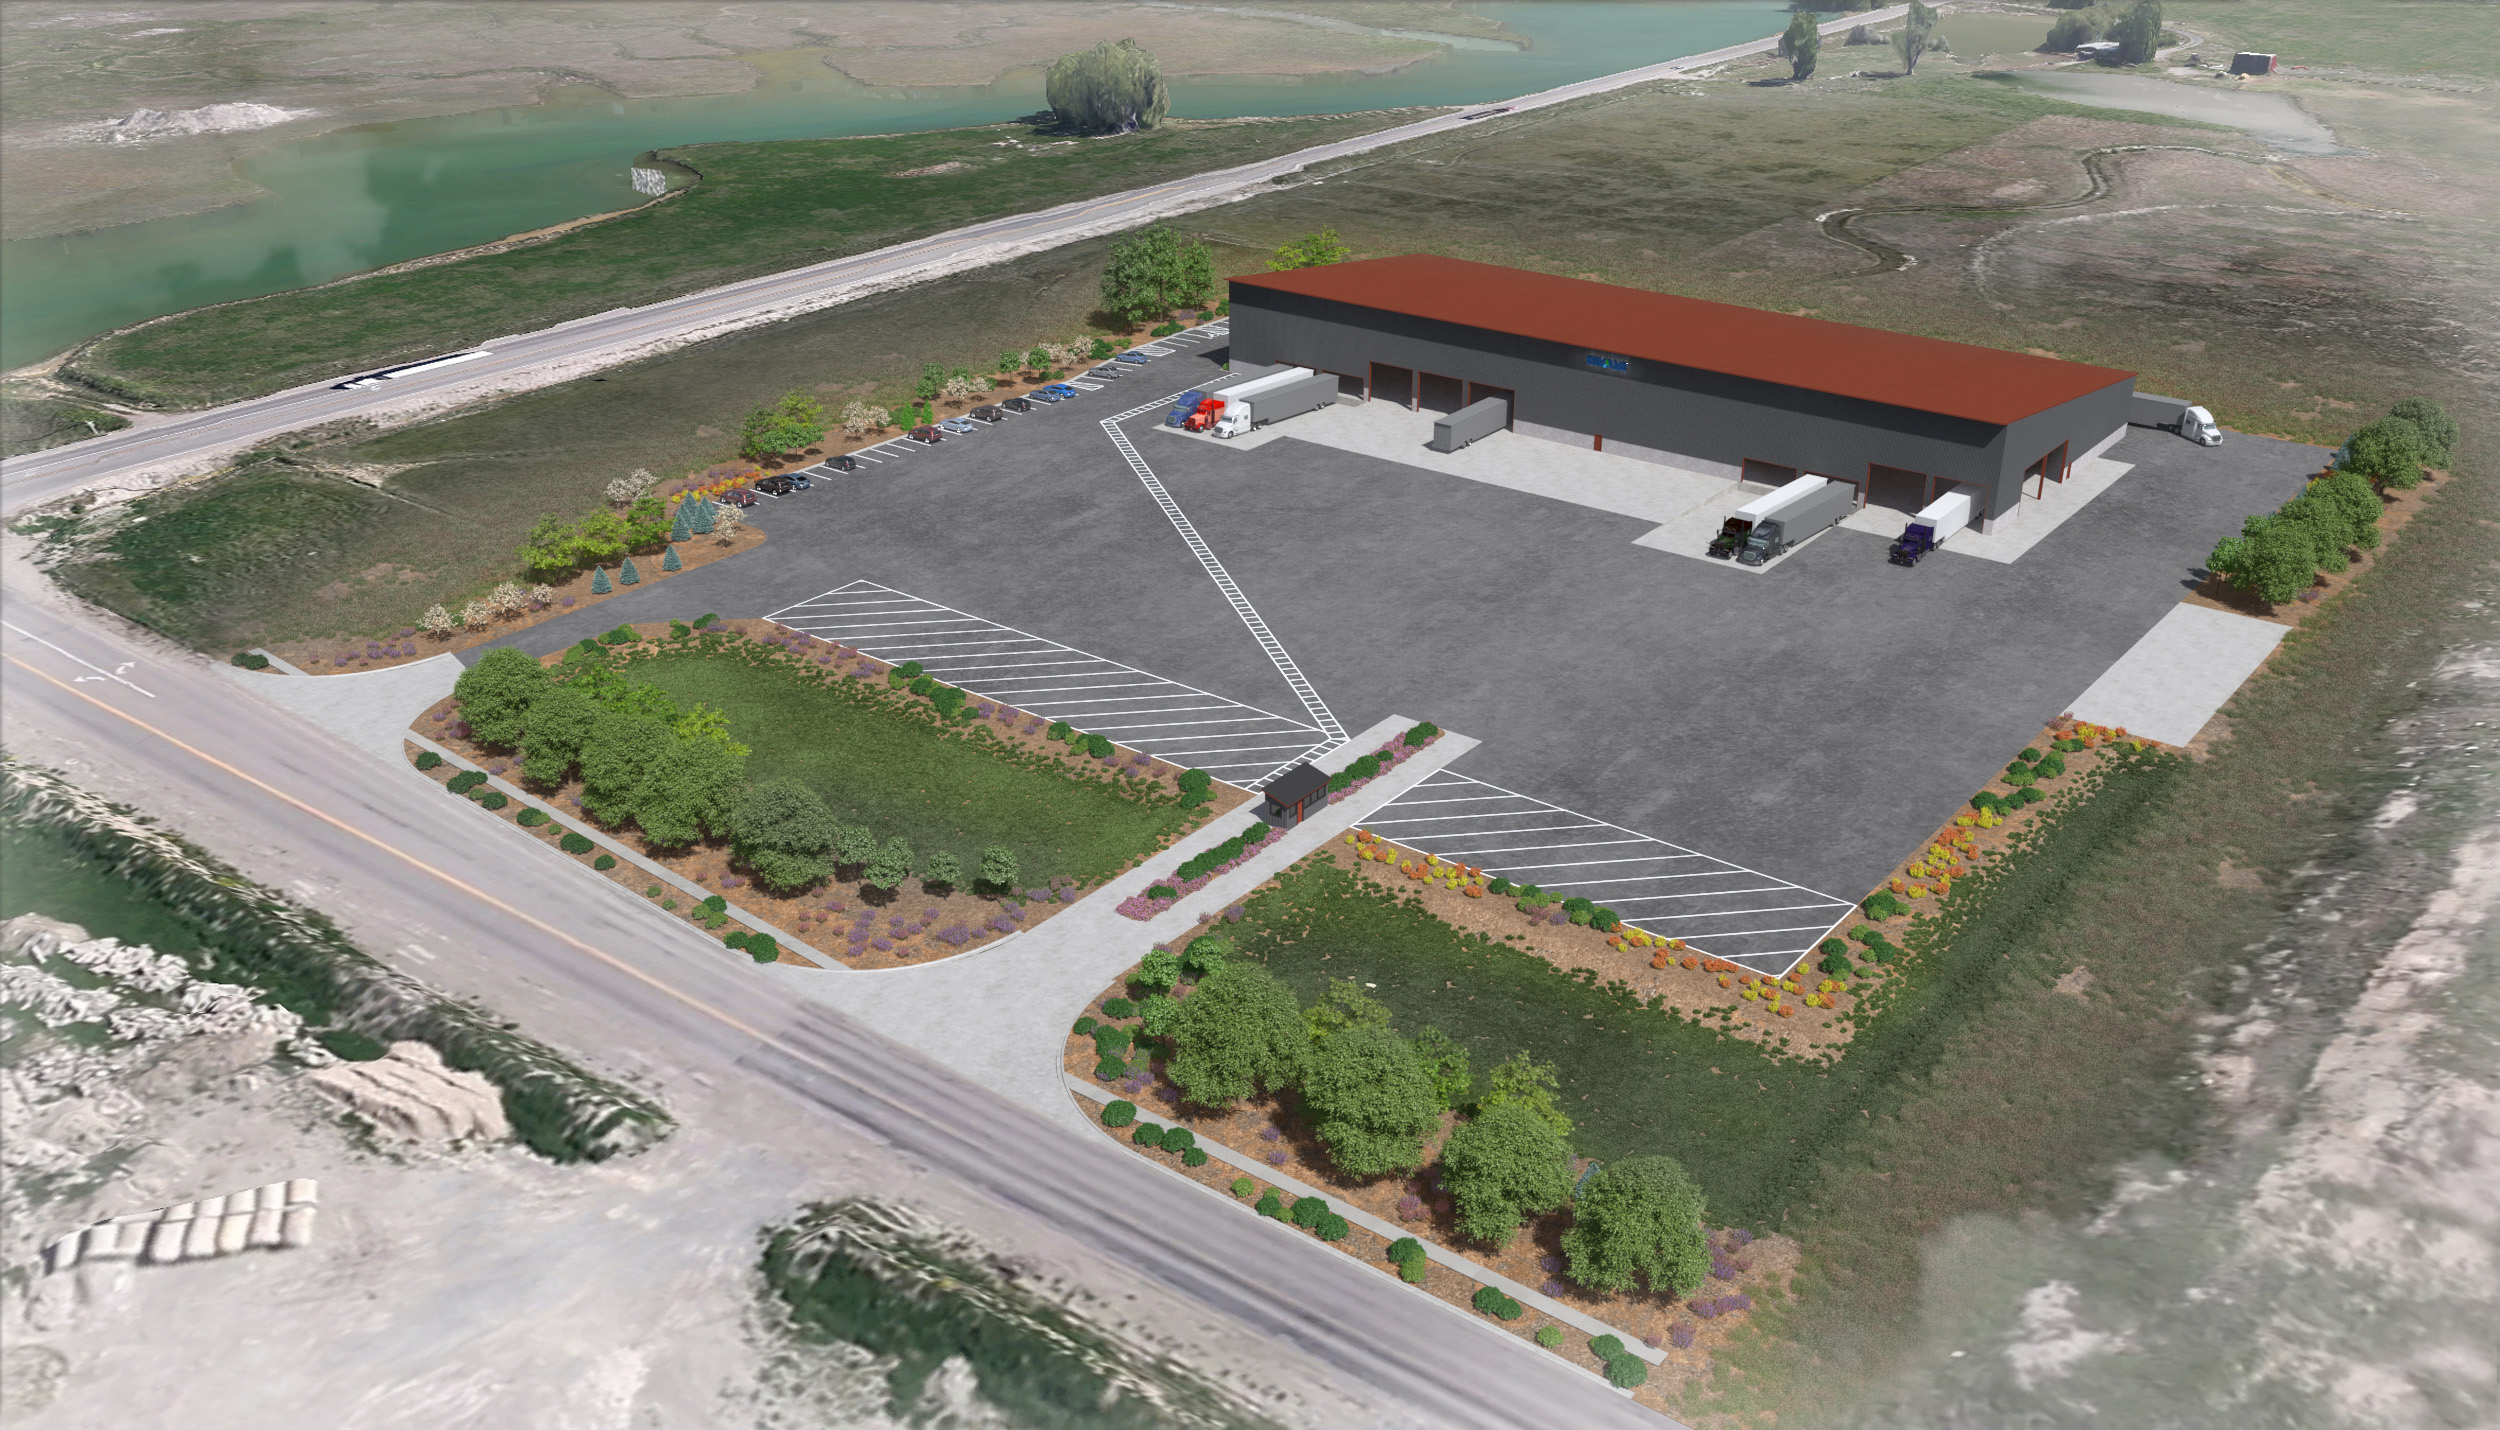 The new Revolve Recycling Facility in northern Utah is under construction and will open its doors in March 2017.